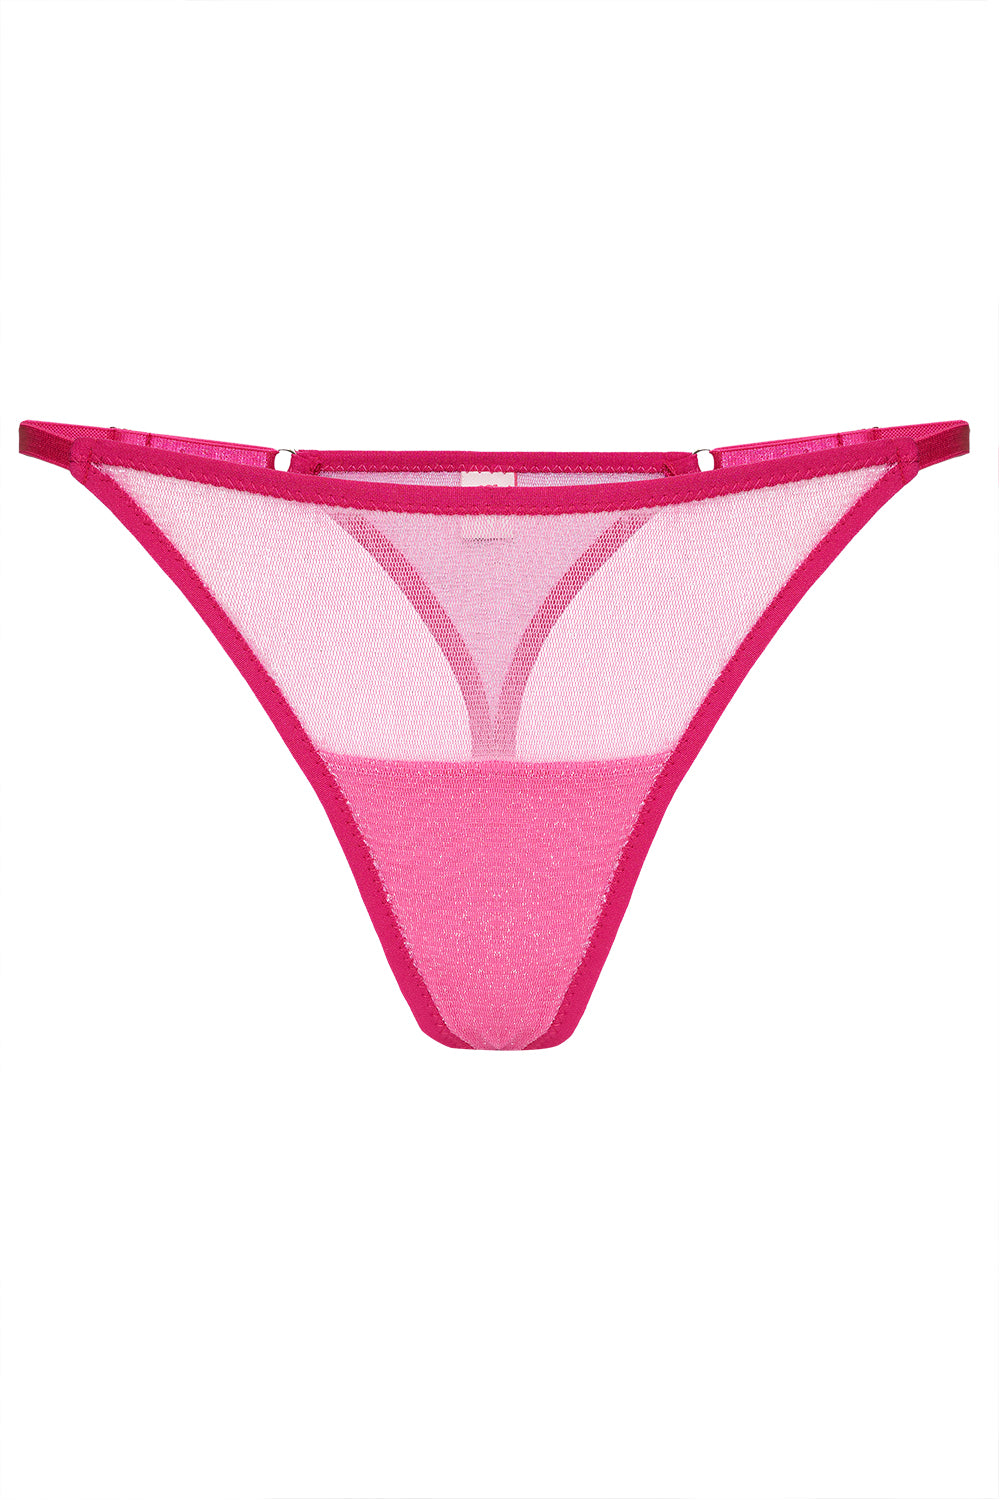 Wildly Pink Silver ultra thongs